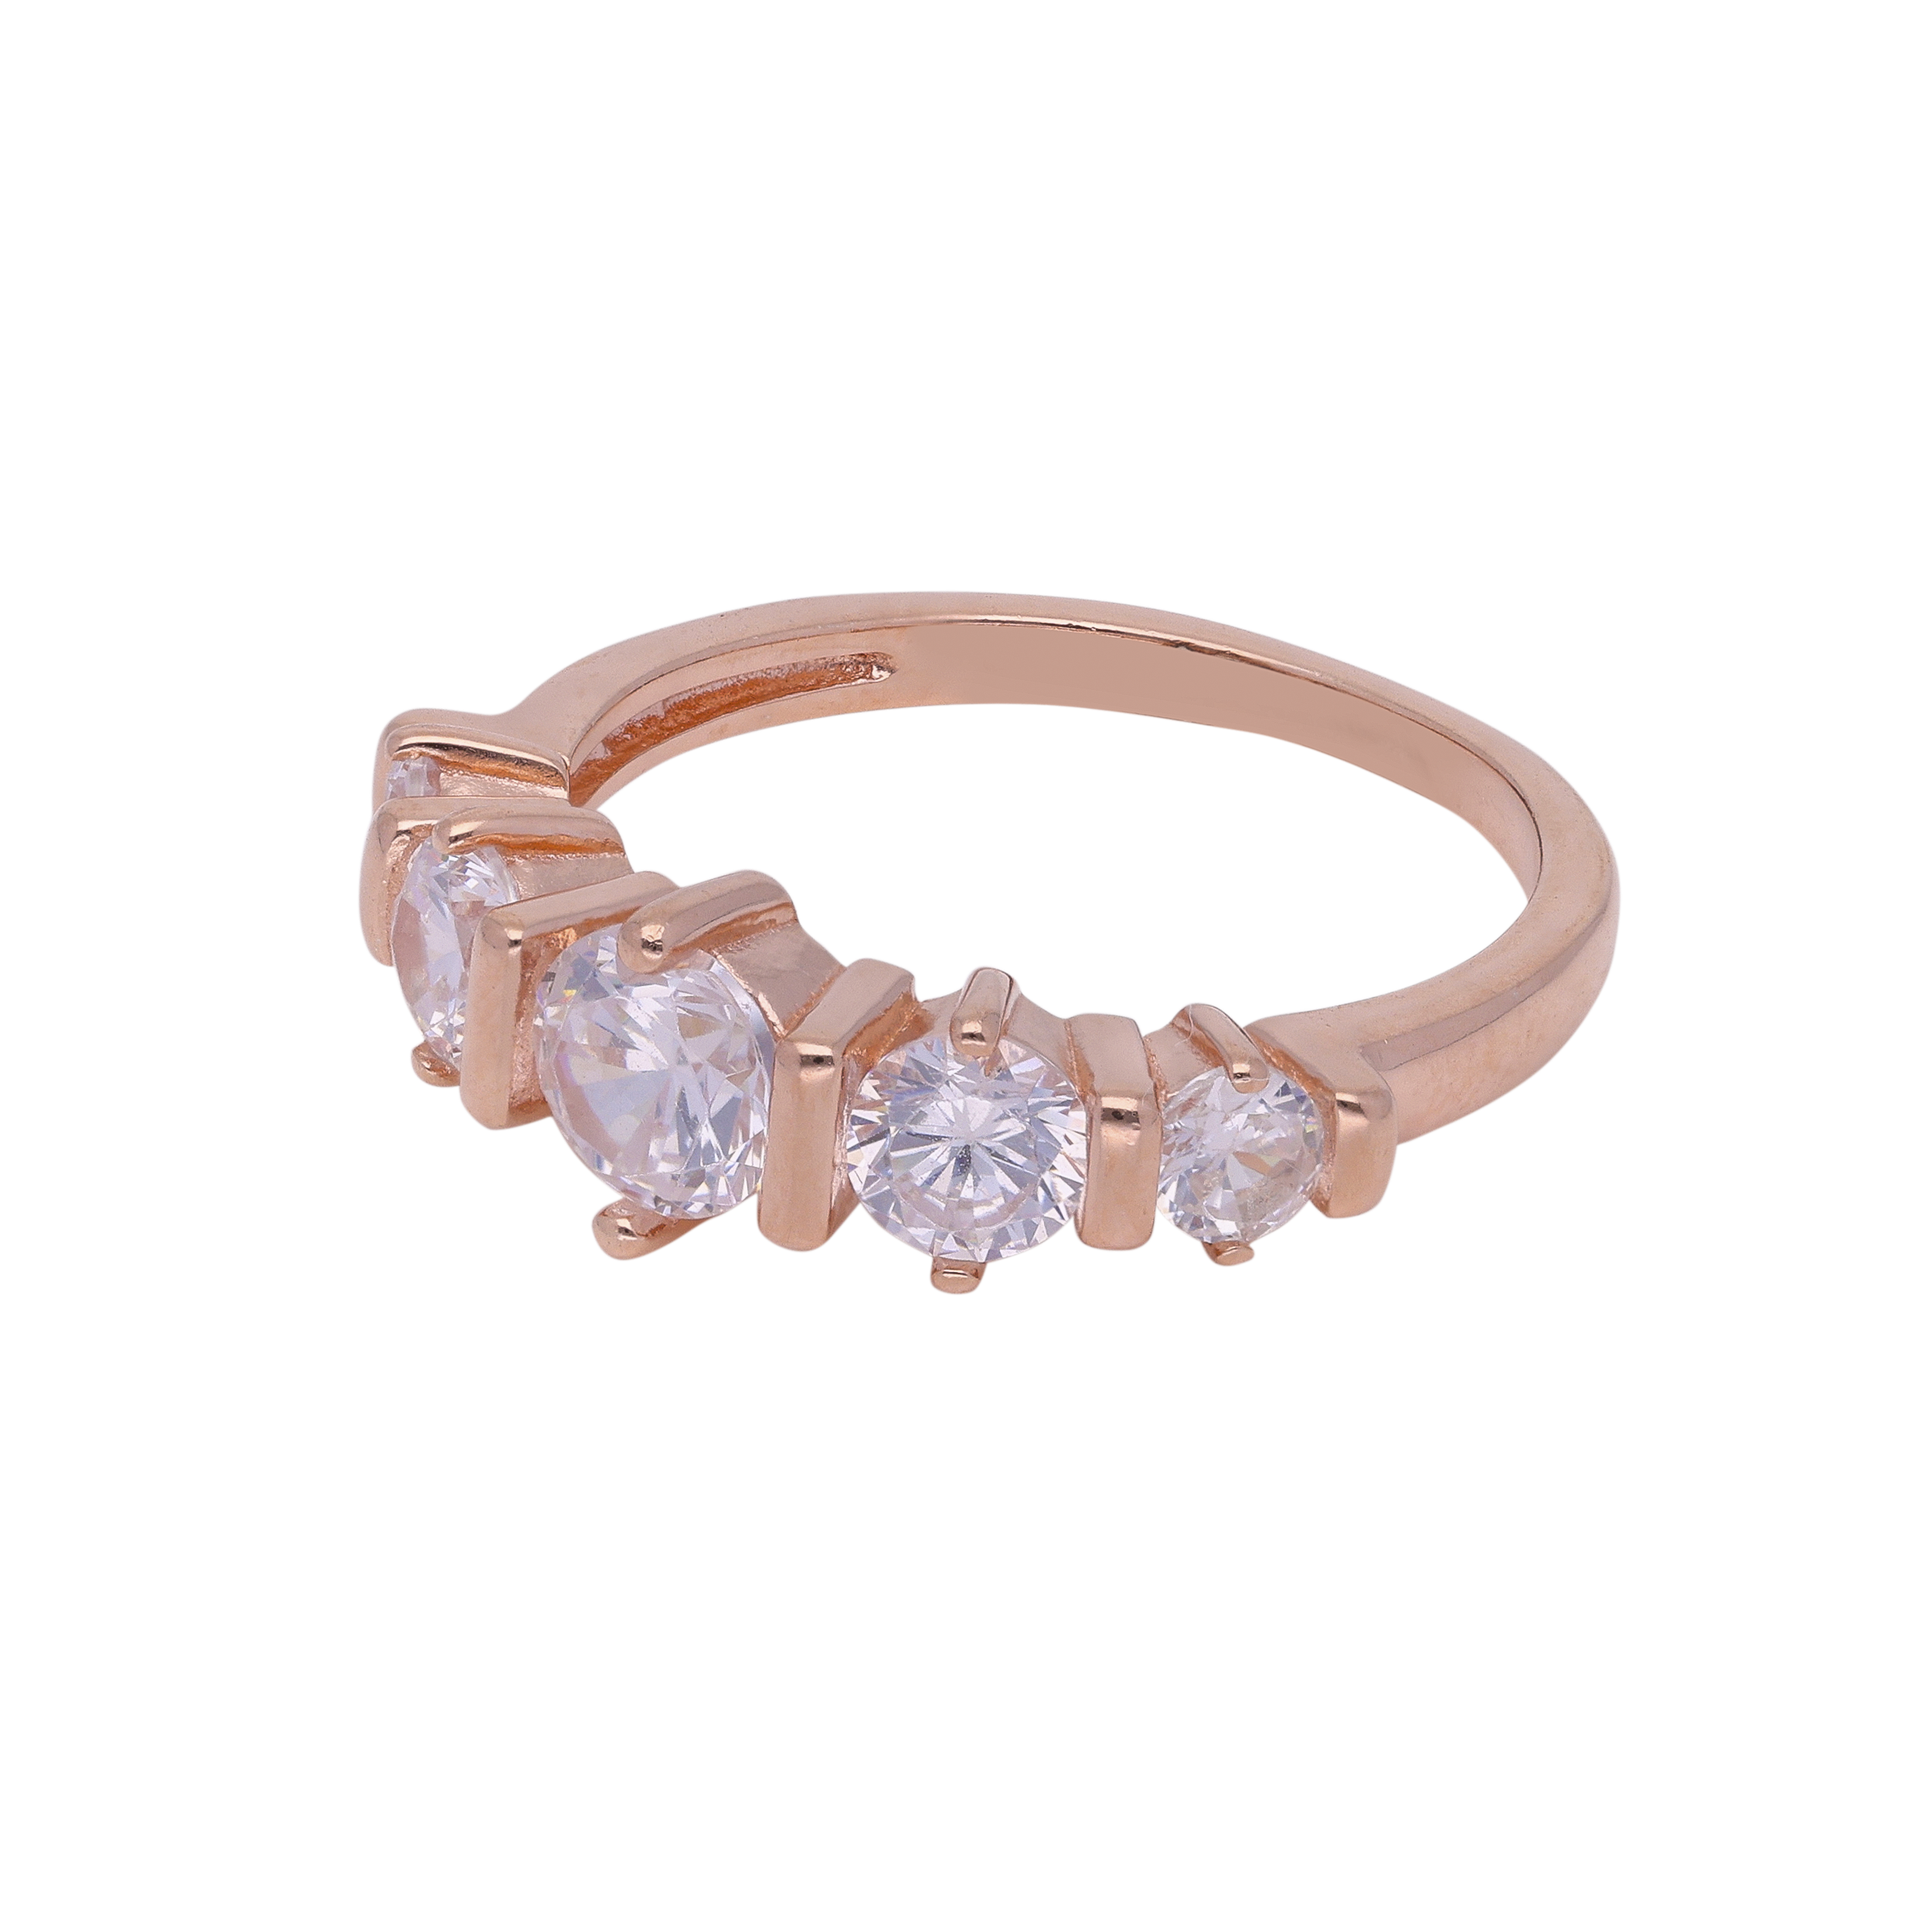 Elegance in Contrast: Sterling Silver Ring with Rose Gold Solitaire Setting | SKU : 0019891989, 0019891972